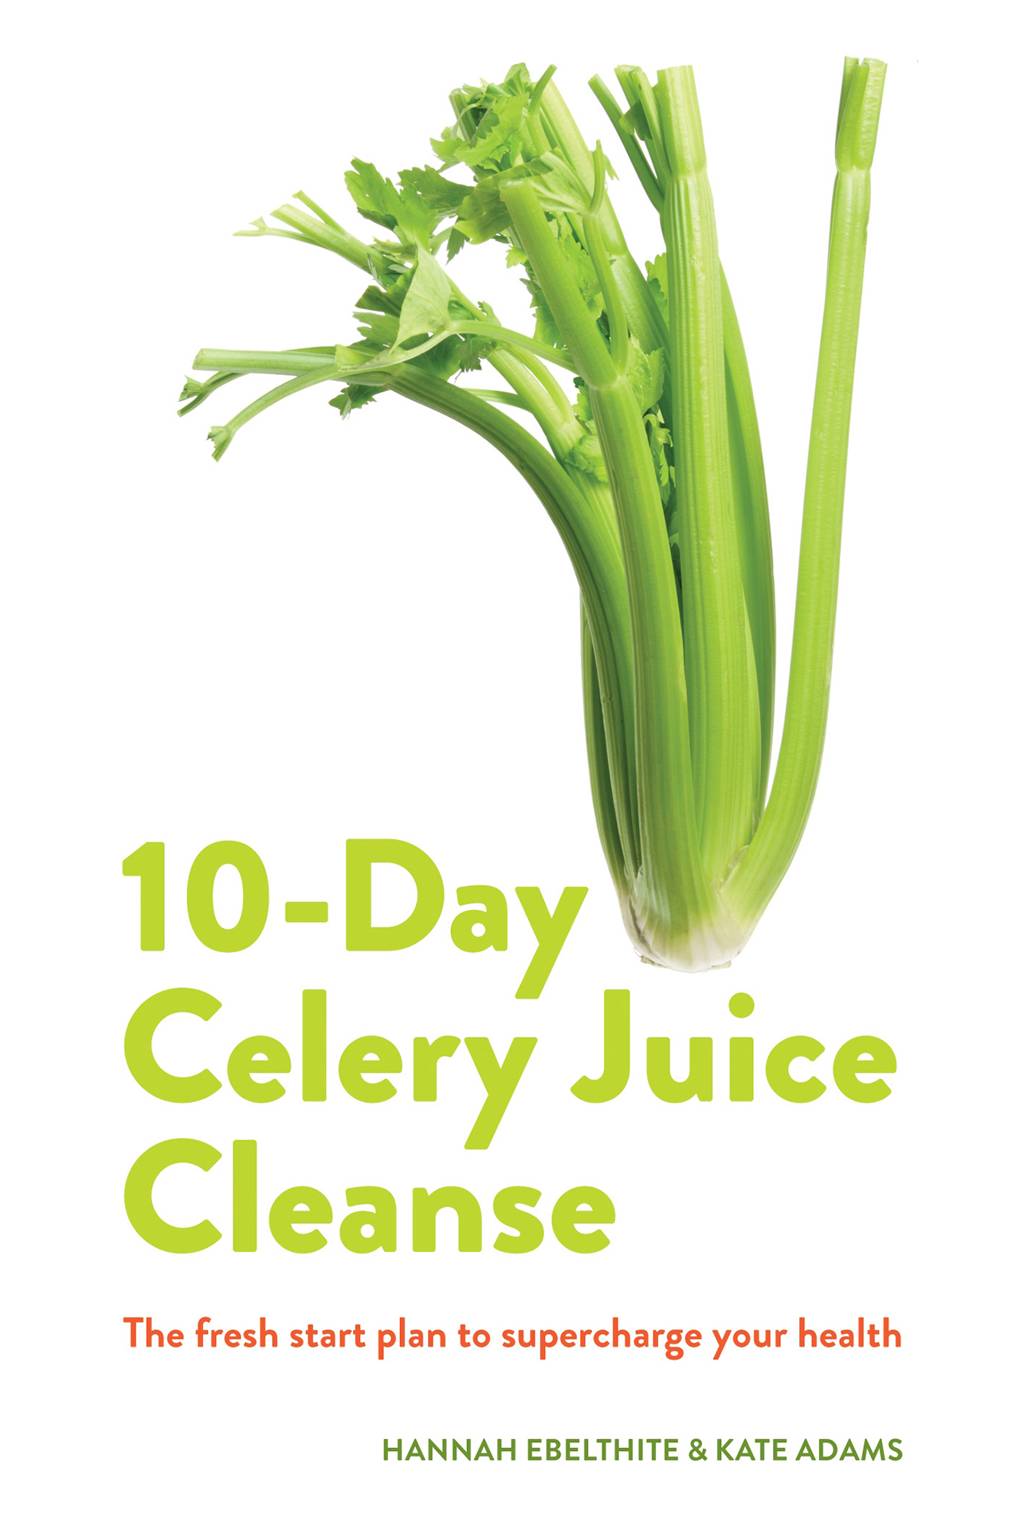 celery juice benefits: does the juice cleanse work? | glamour uk